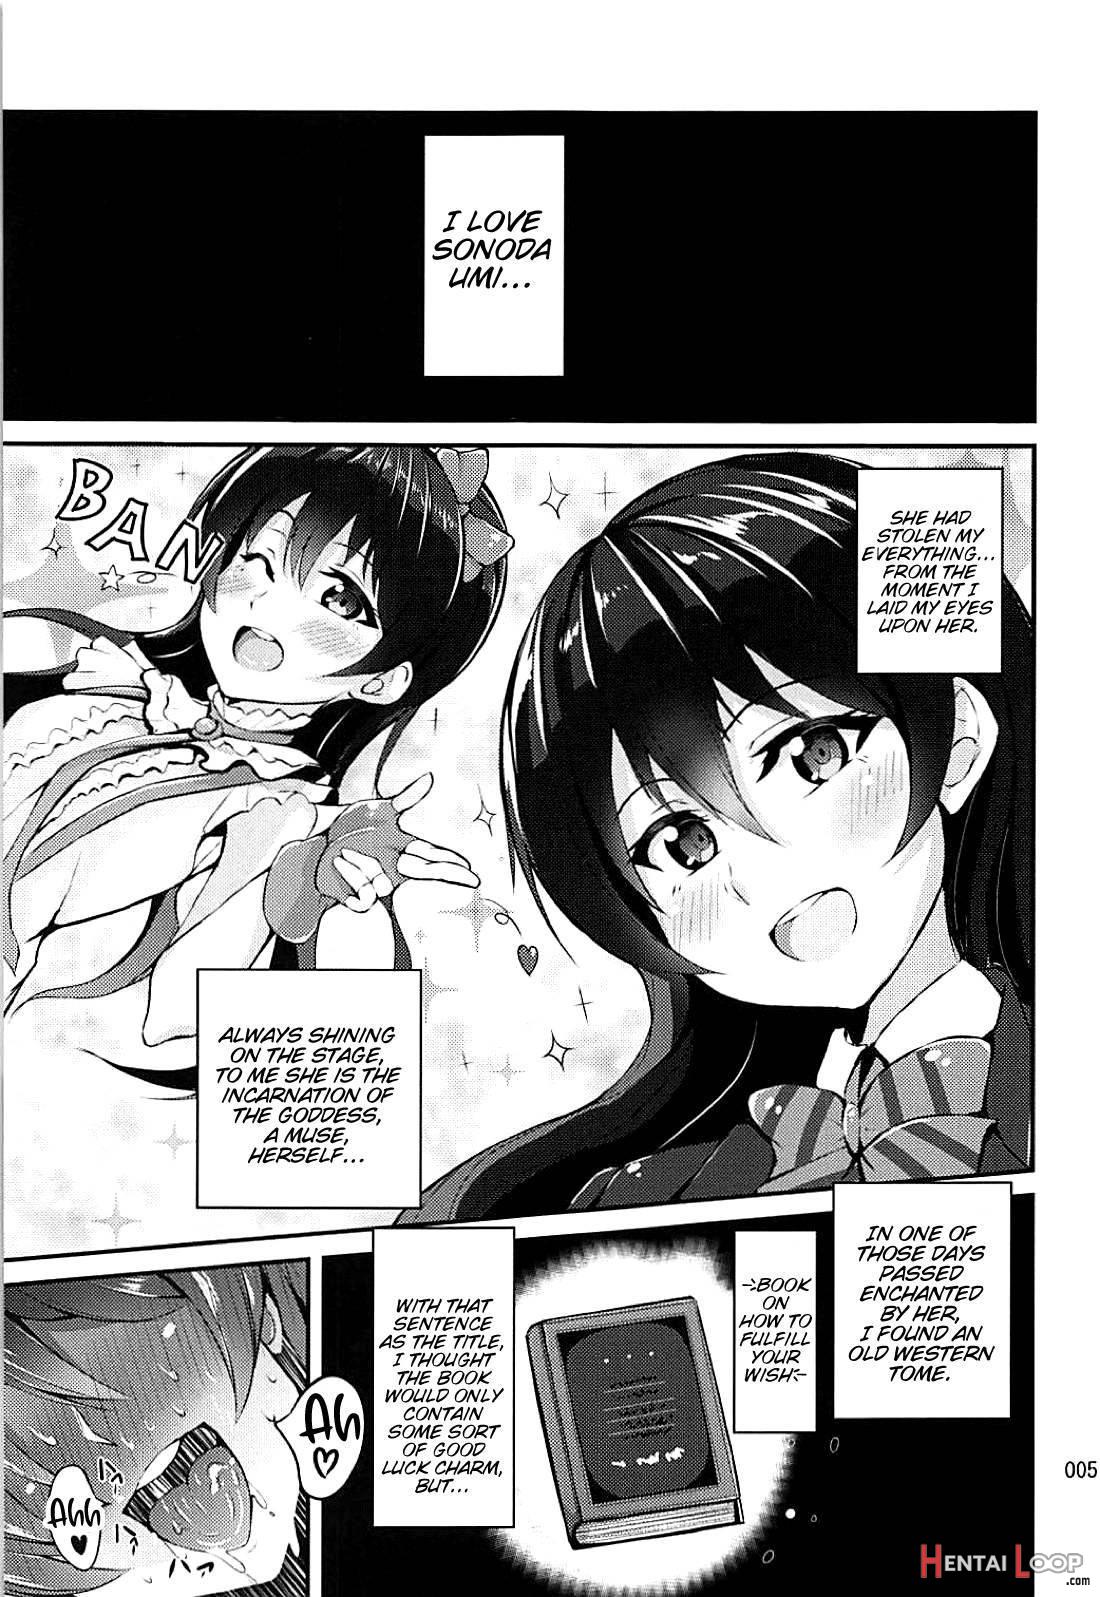 Succubus Umi-chan page 2